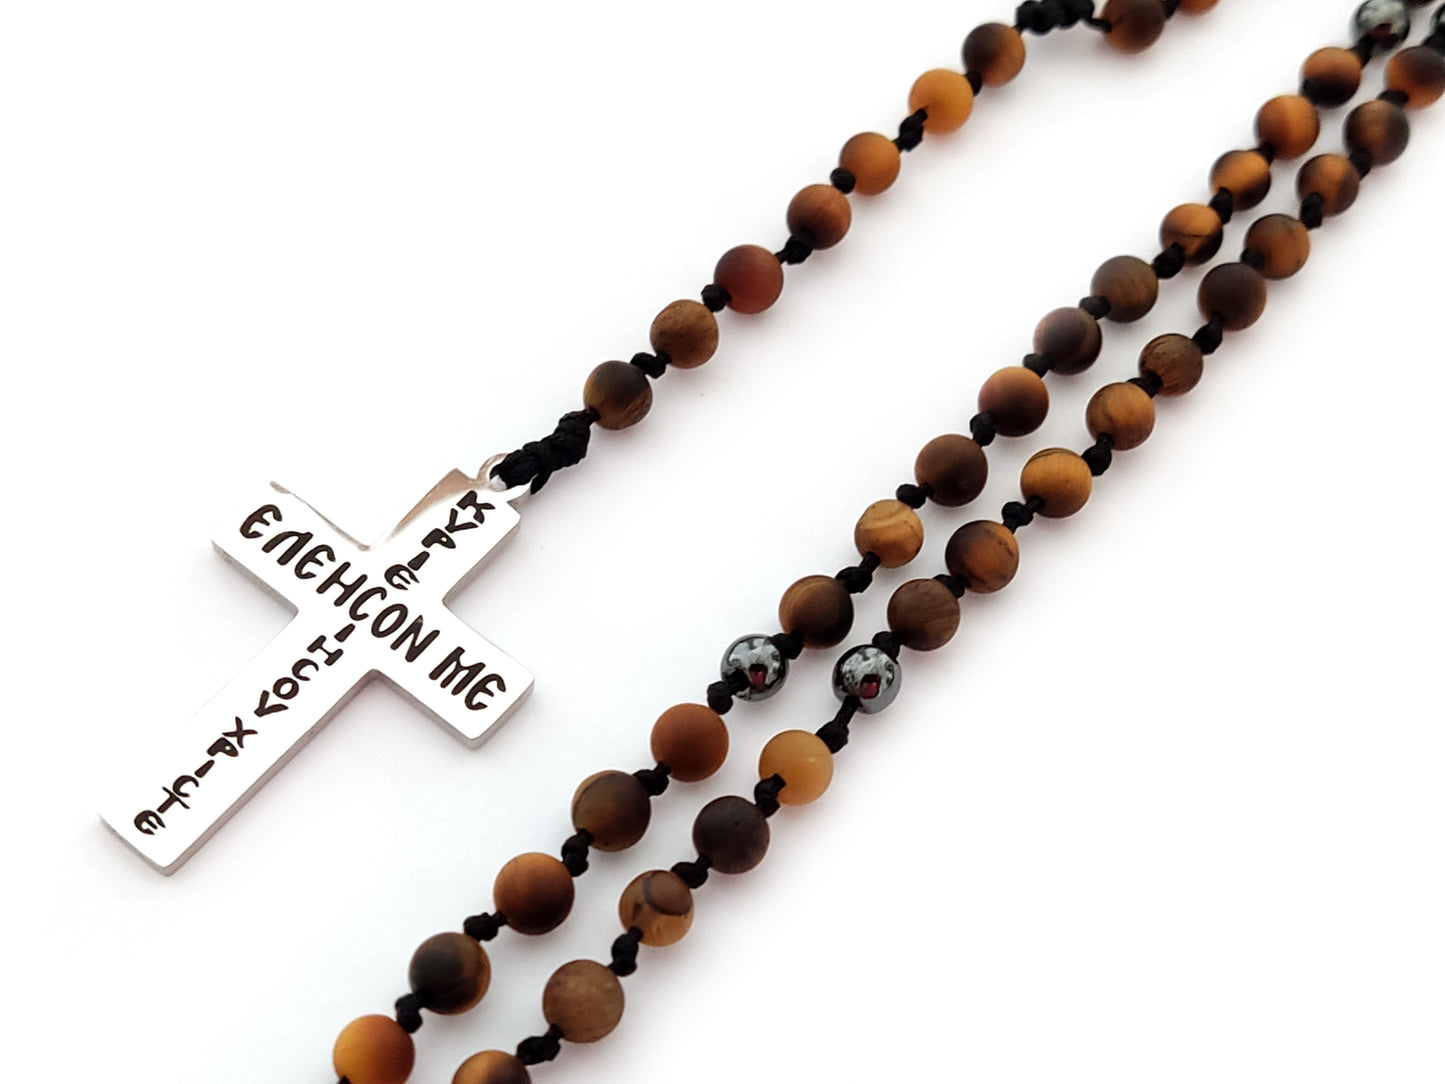 Greek cross necklace made of natural matt tiger's eye measuring 4mm in adjustable length. The cross is made of stainless steel with the words " Jesus Christ Show Mercy On Me". The necklace is handmade in Greece.